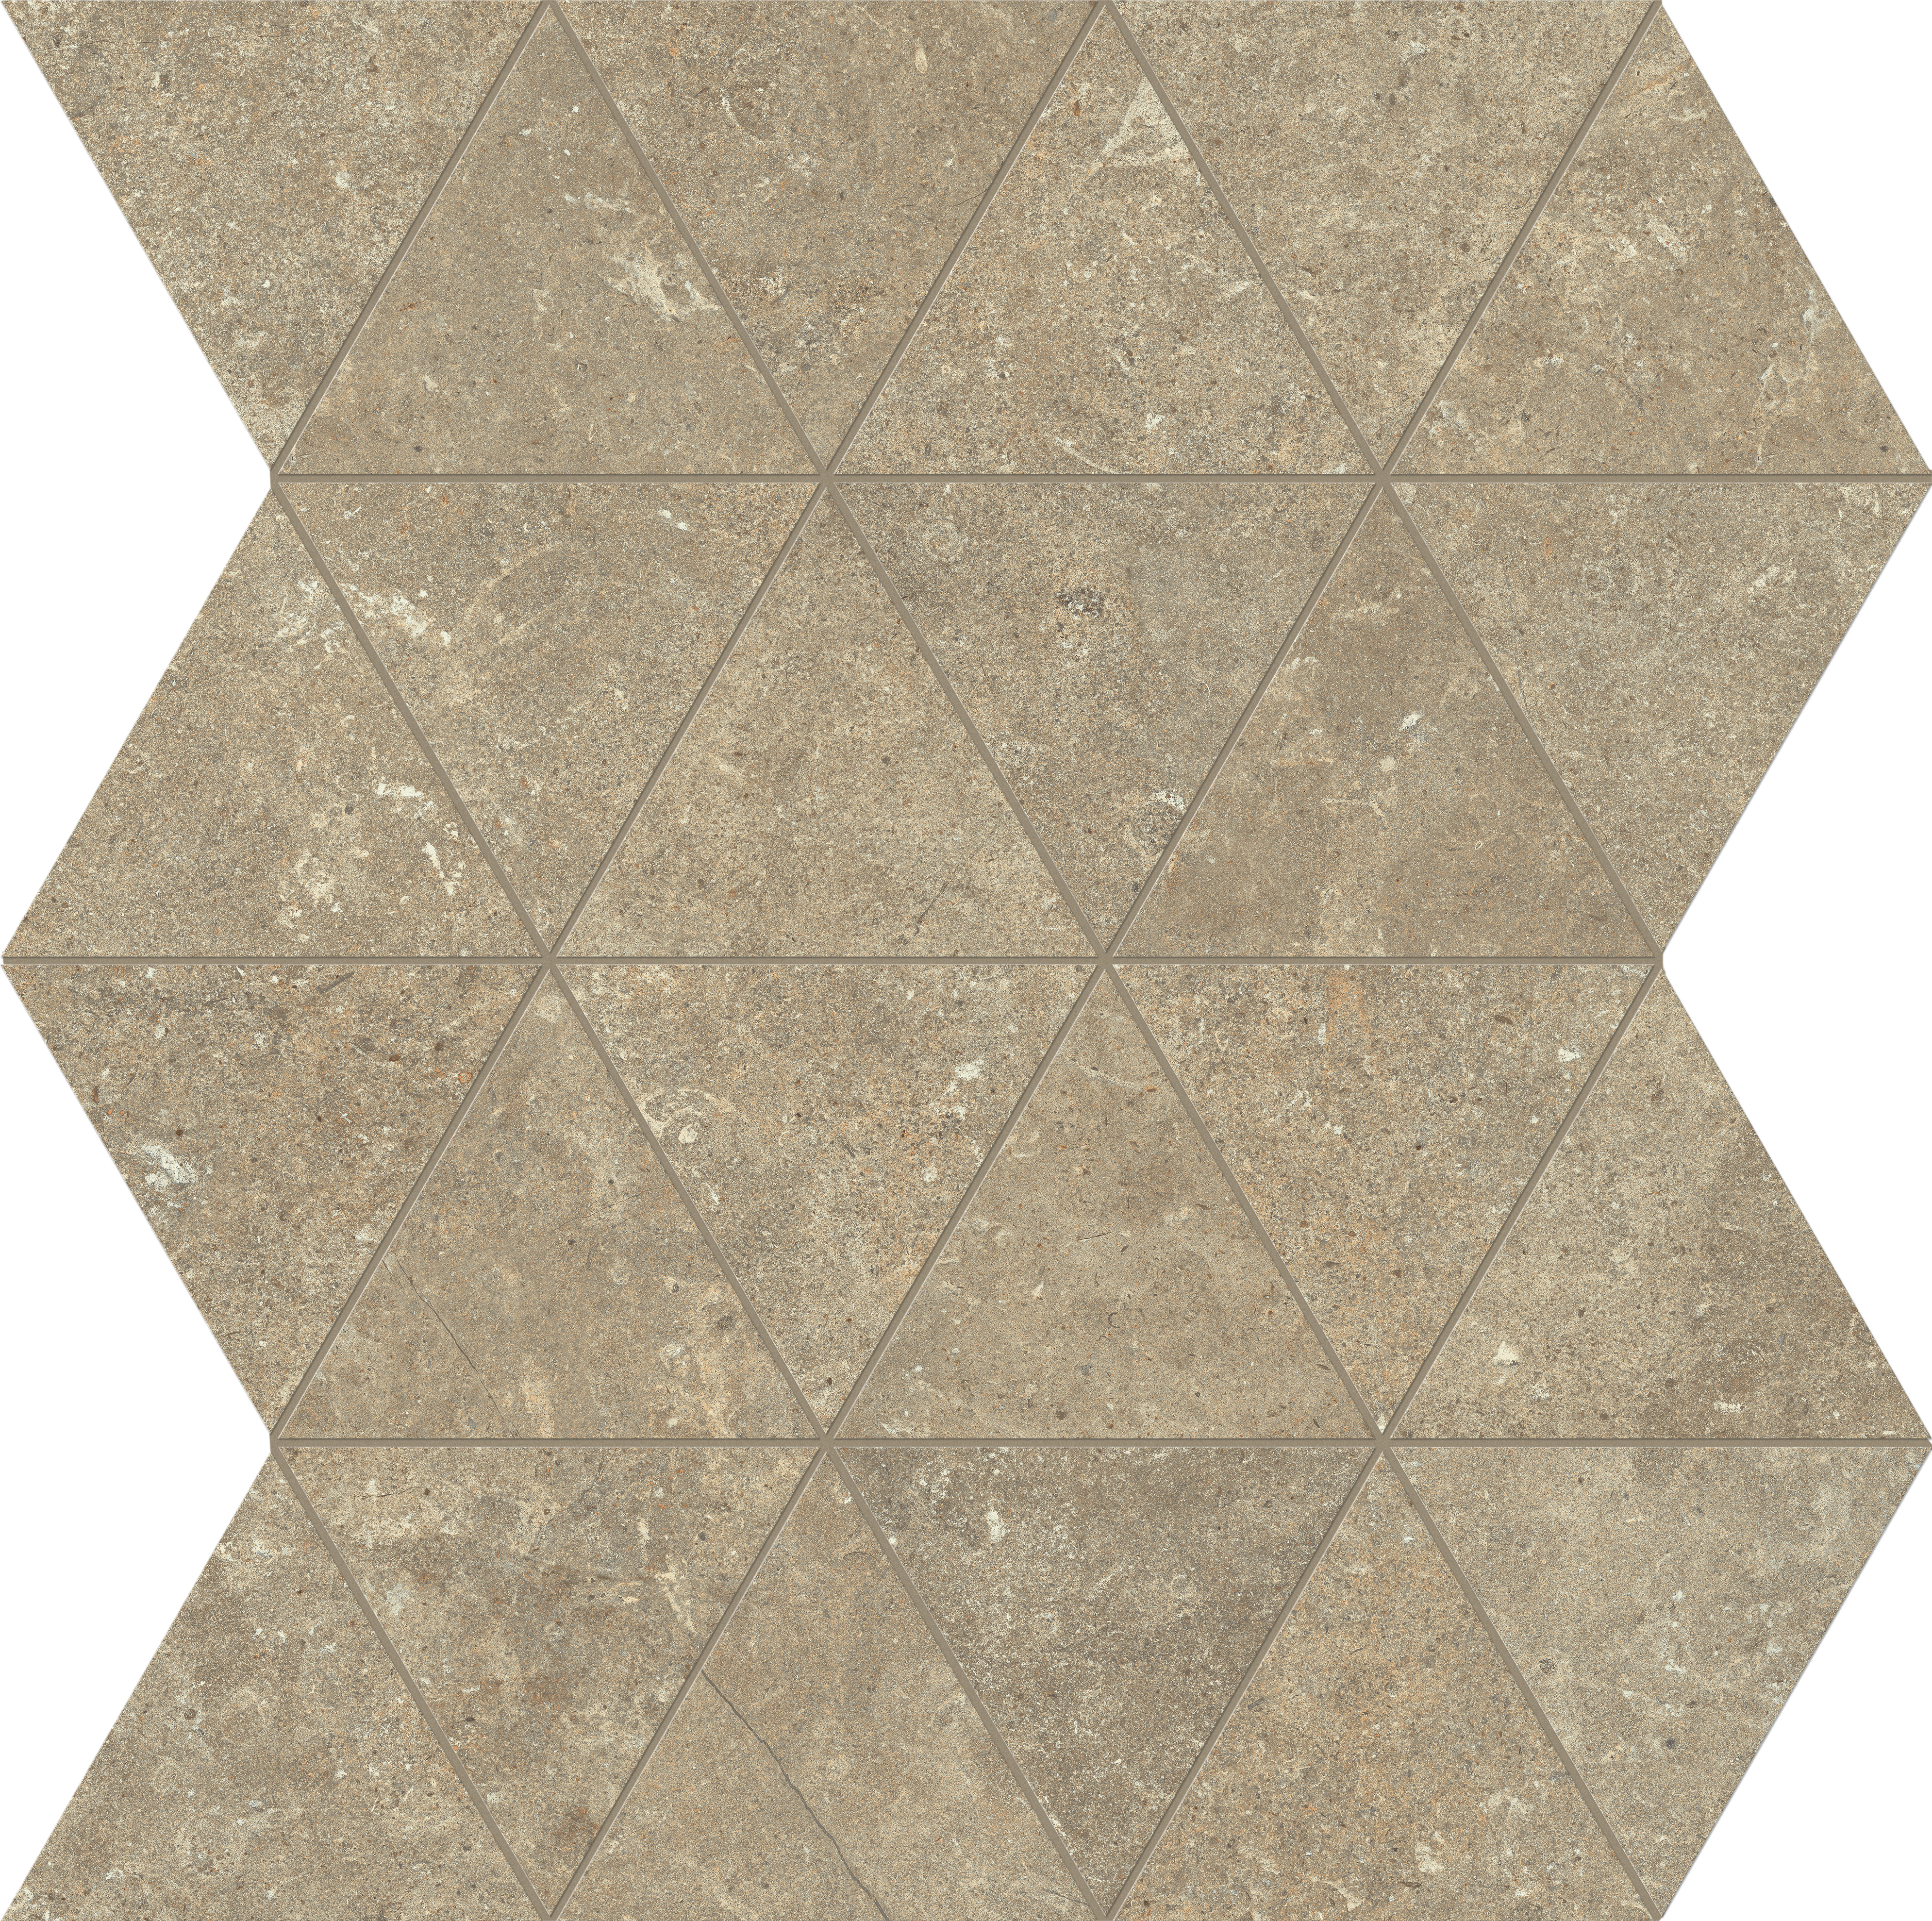 Marca Corona Arkistyle Earth Strutturato Hithick Fractal Tesserre J298 strutturato hithick 29x33,5cm rectified 9mm